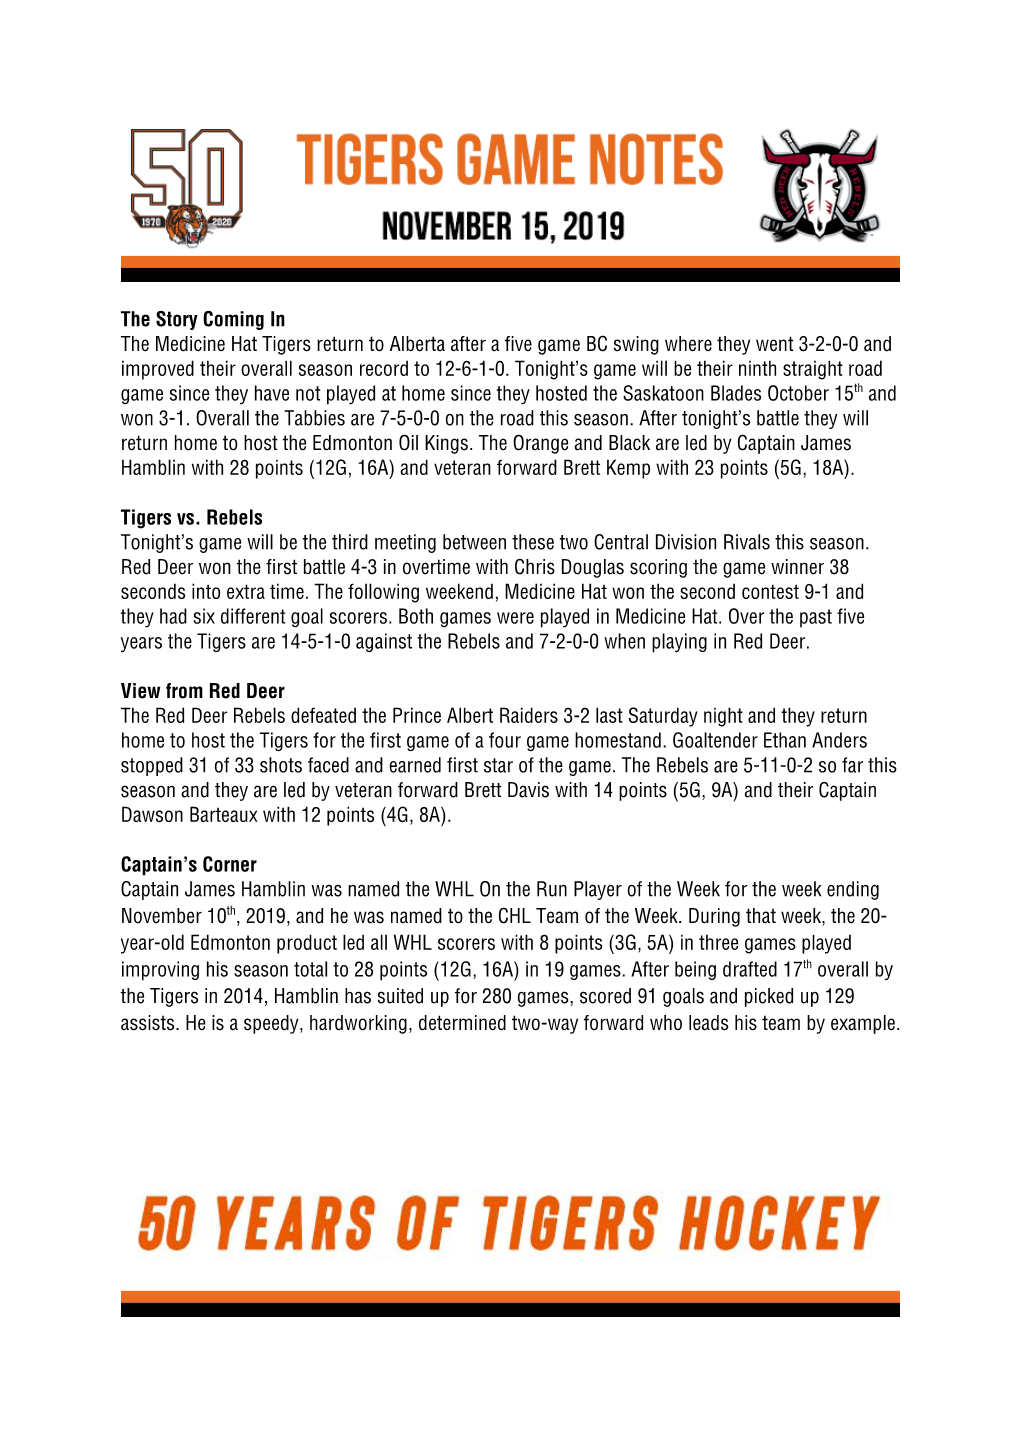 The Story Coming in the Medicine Hat Tigers Return to Alberta After a Five Game BC Swing Where They Went 3-2-0-0 and Improved Their Overall Season Record to 12-6-1-0